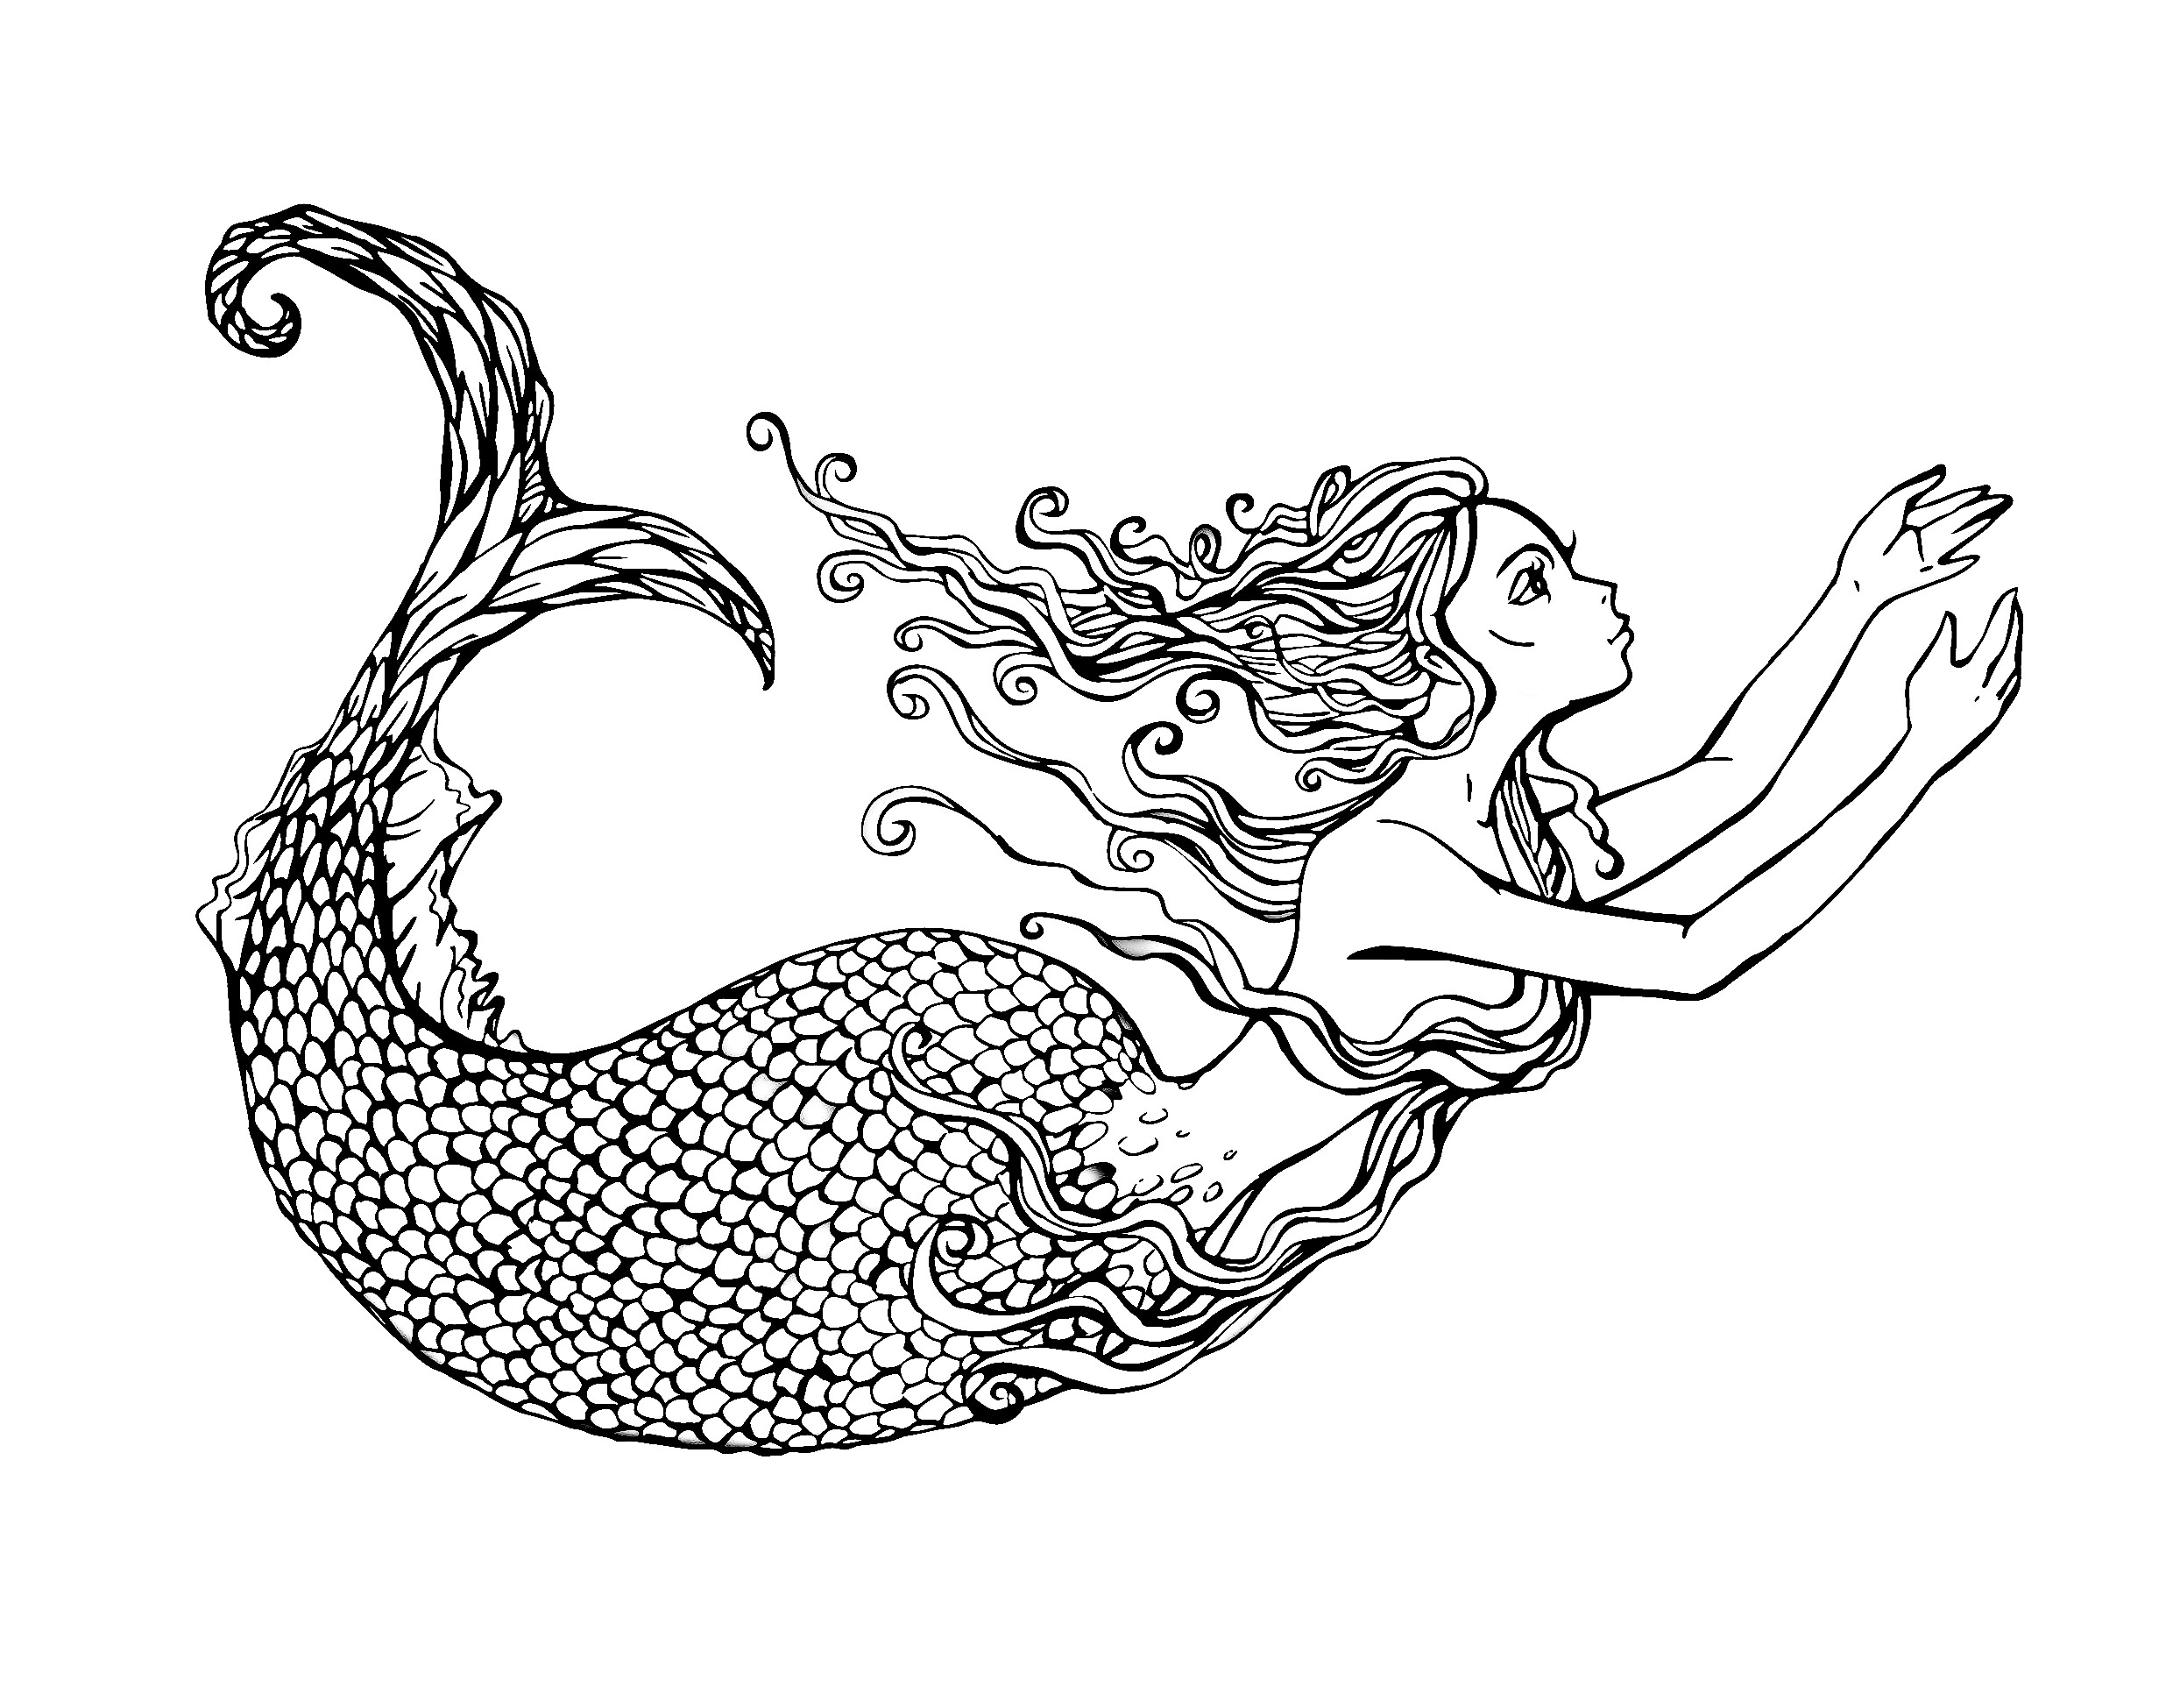 Download Swimming mermaid by lian2011 | Water worlds - Coloring pages for adults | JustColor